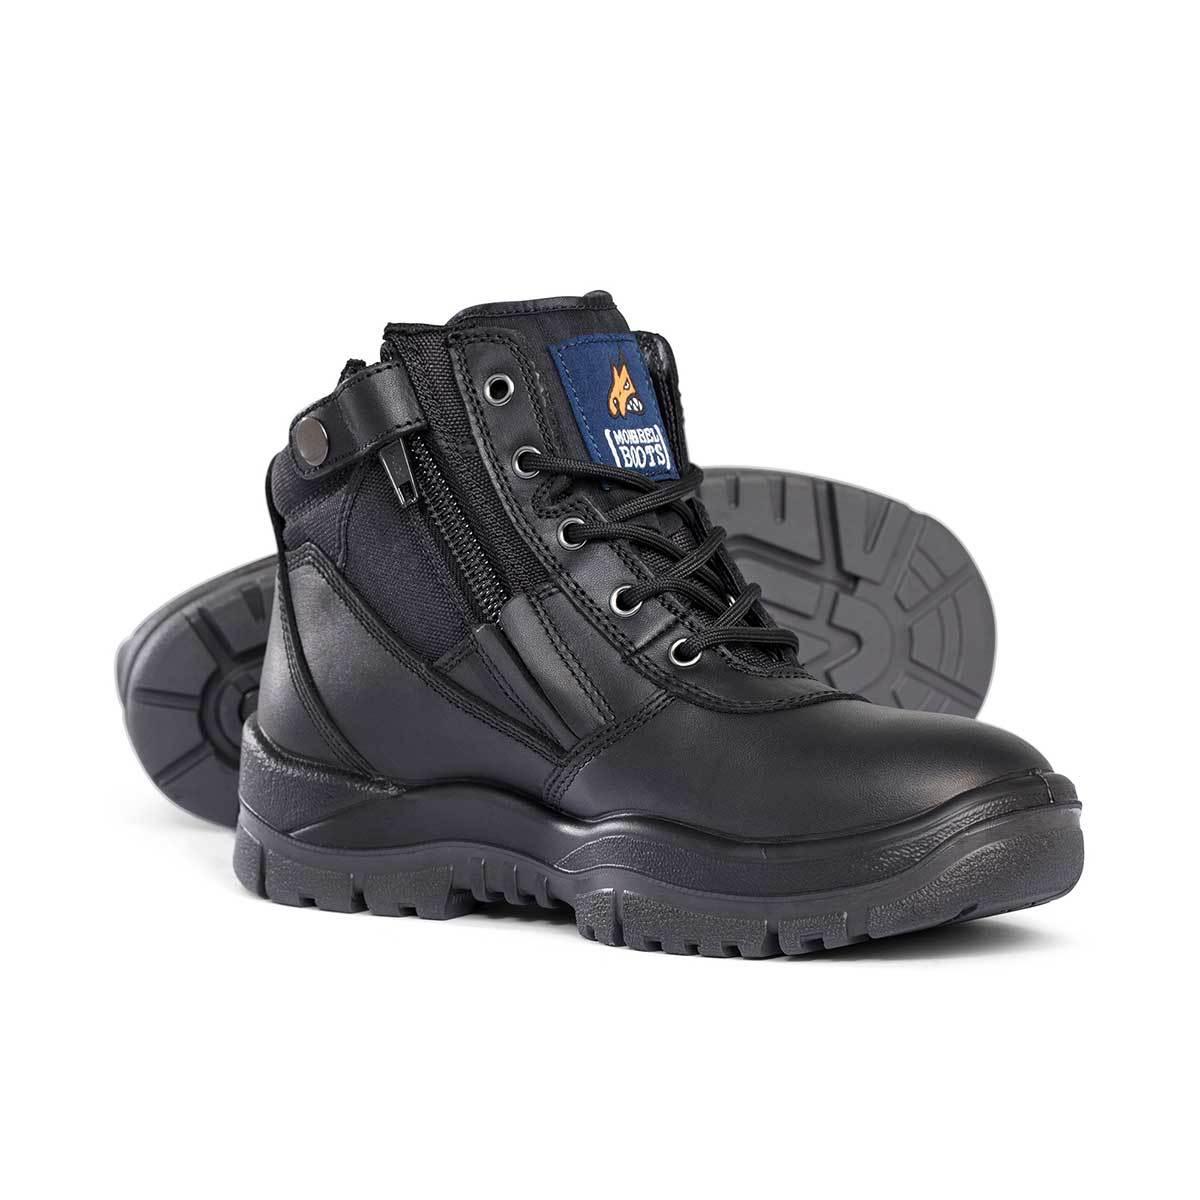 Mongrel Zipsider Non-Safety Soft Toe Work Boots - The Next Pair